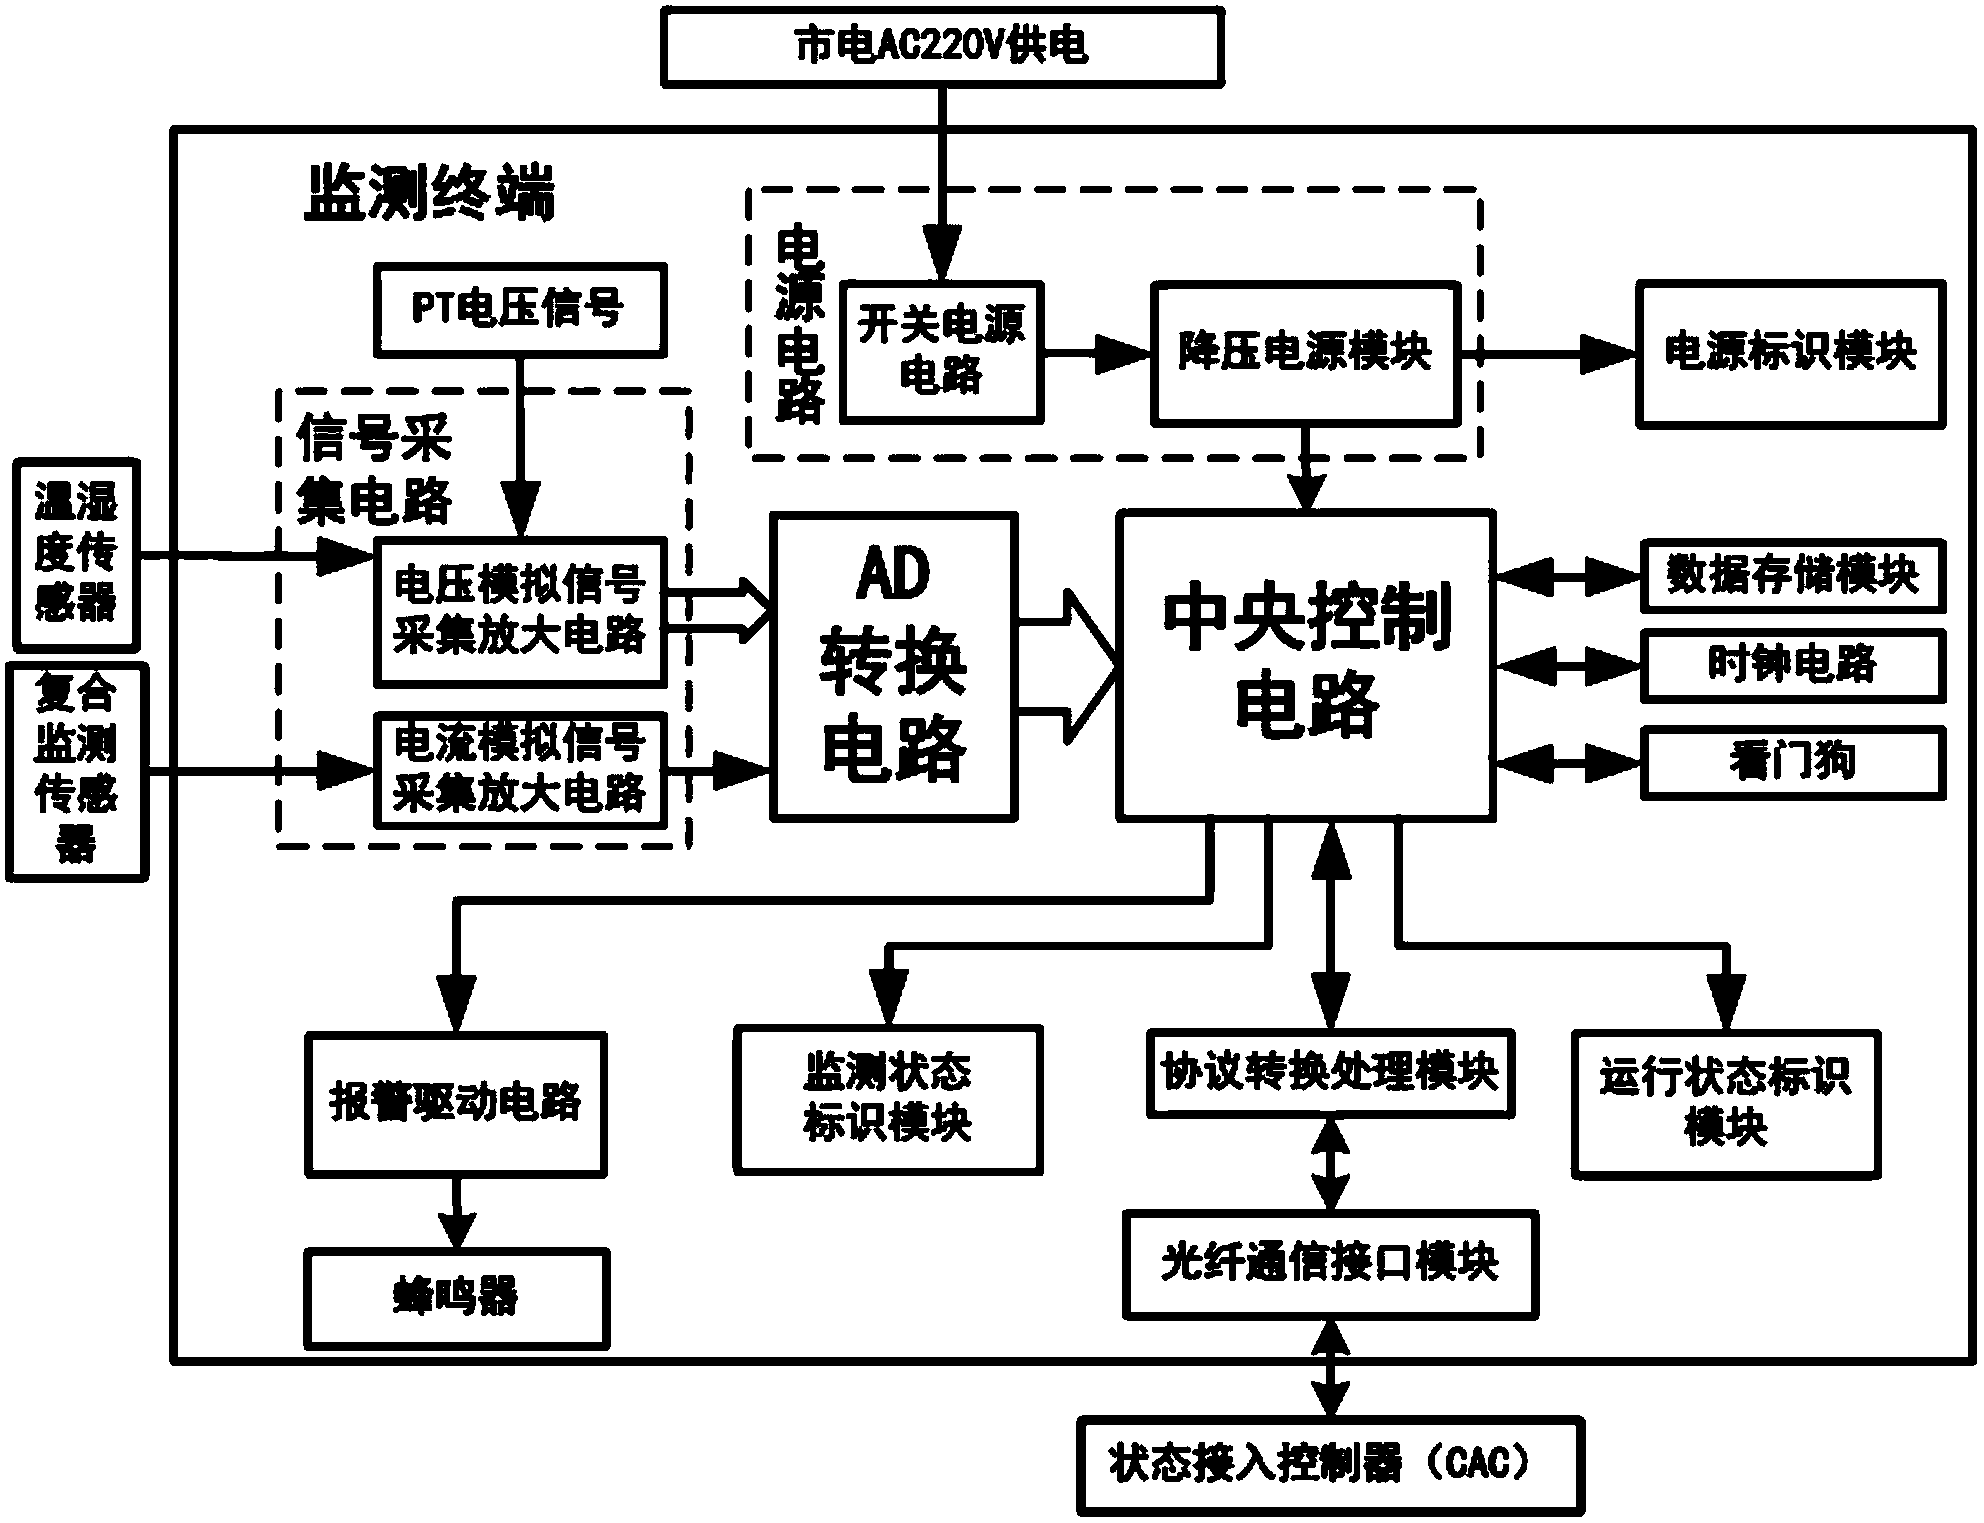 Insulation online state monitoring device of zinc oxide arrester